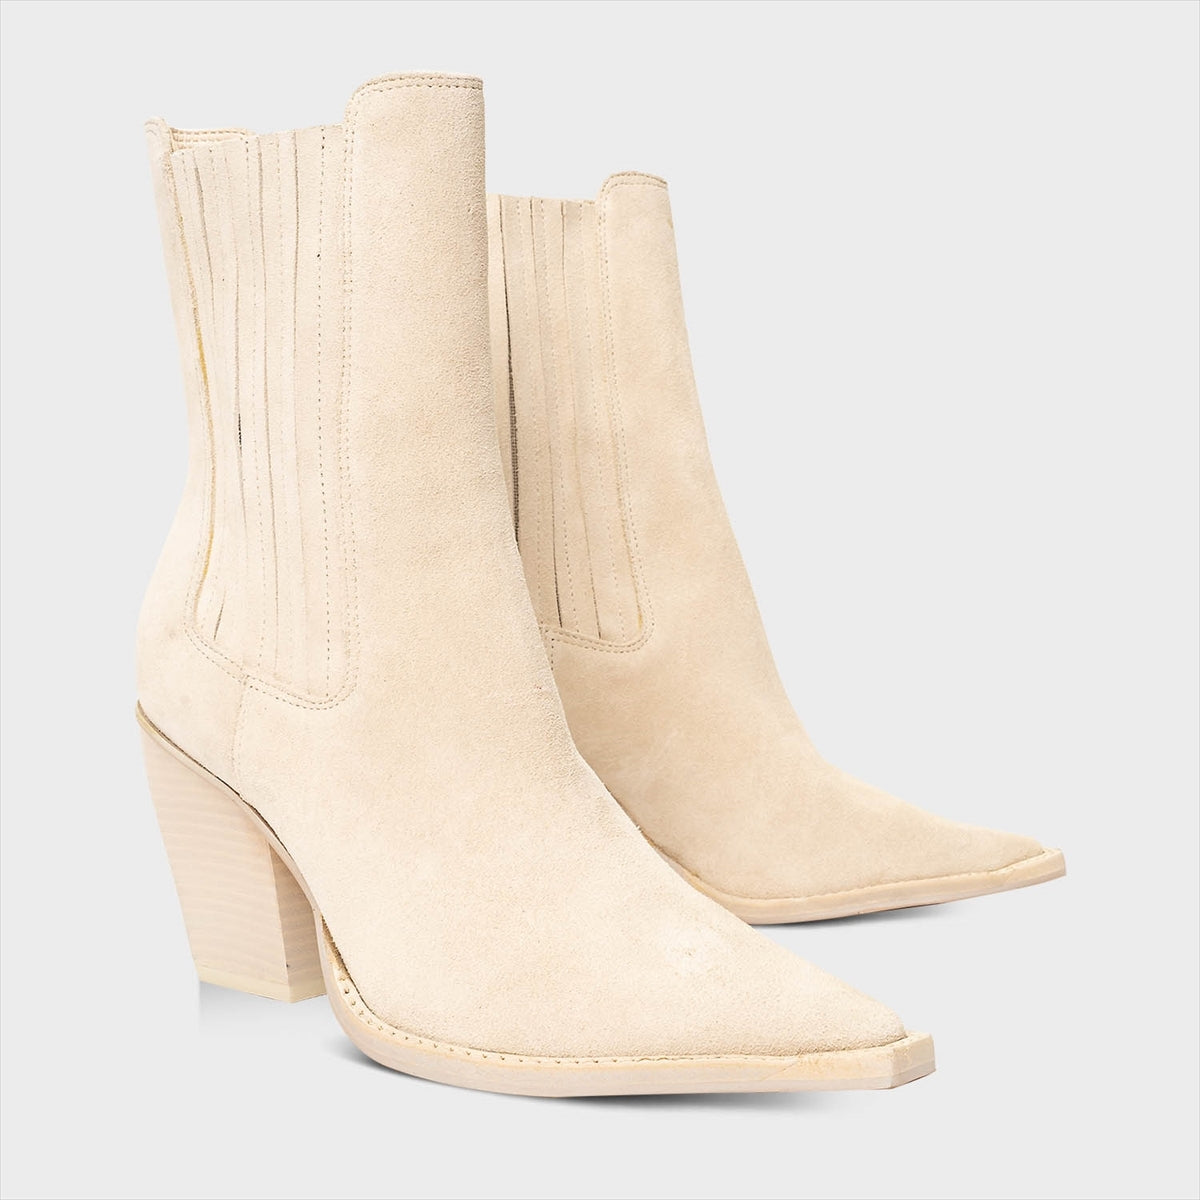 CARRANO SUEDE BOOTS